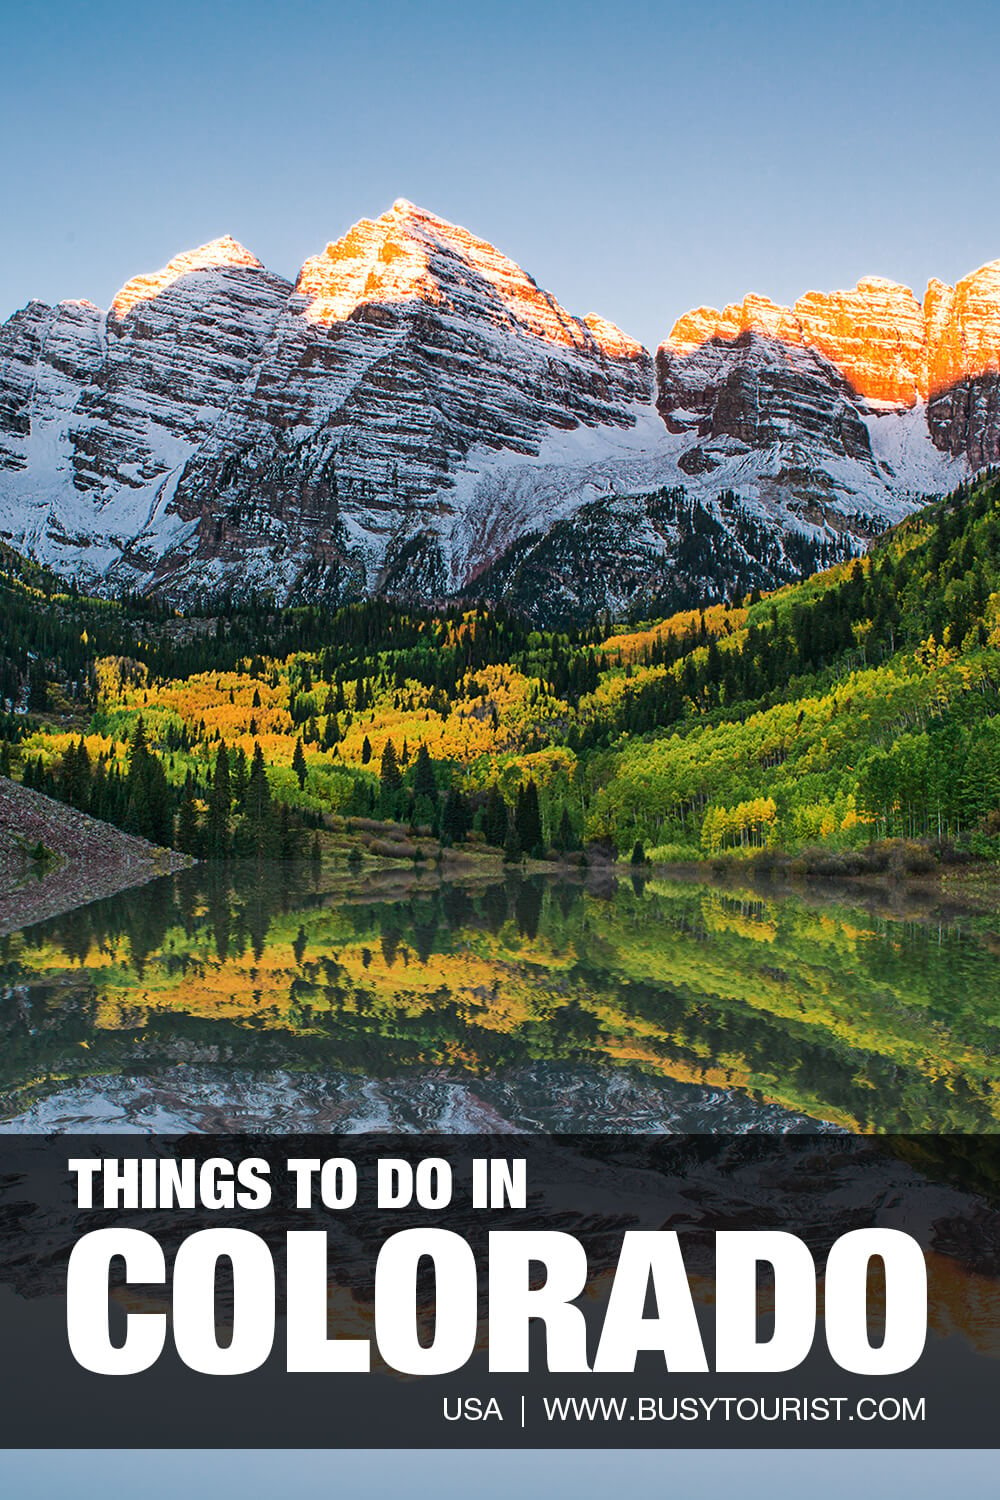 51 Fun Things To Do & Places To Visit In Colorado Attractions